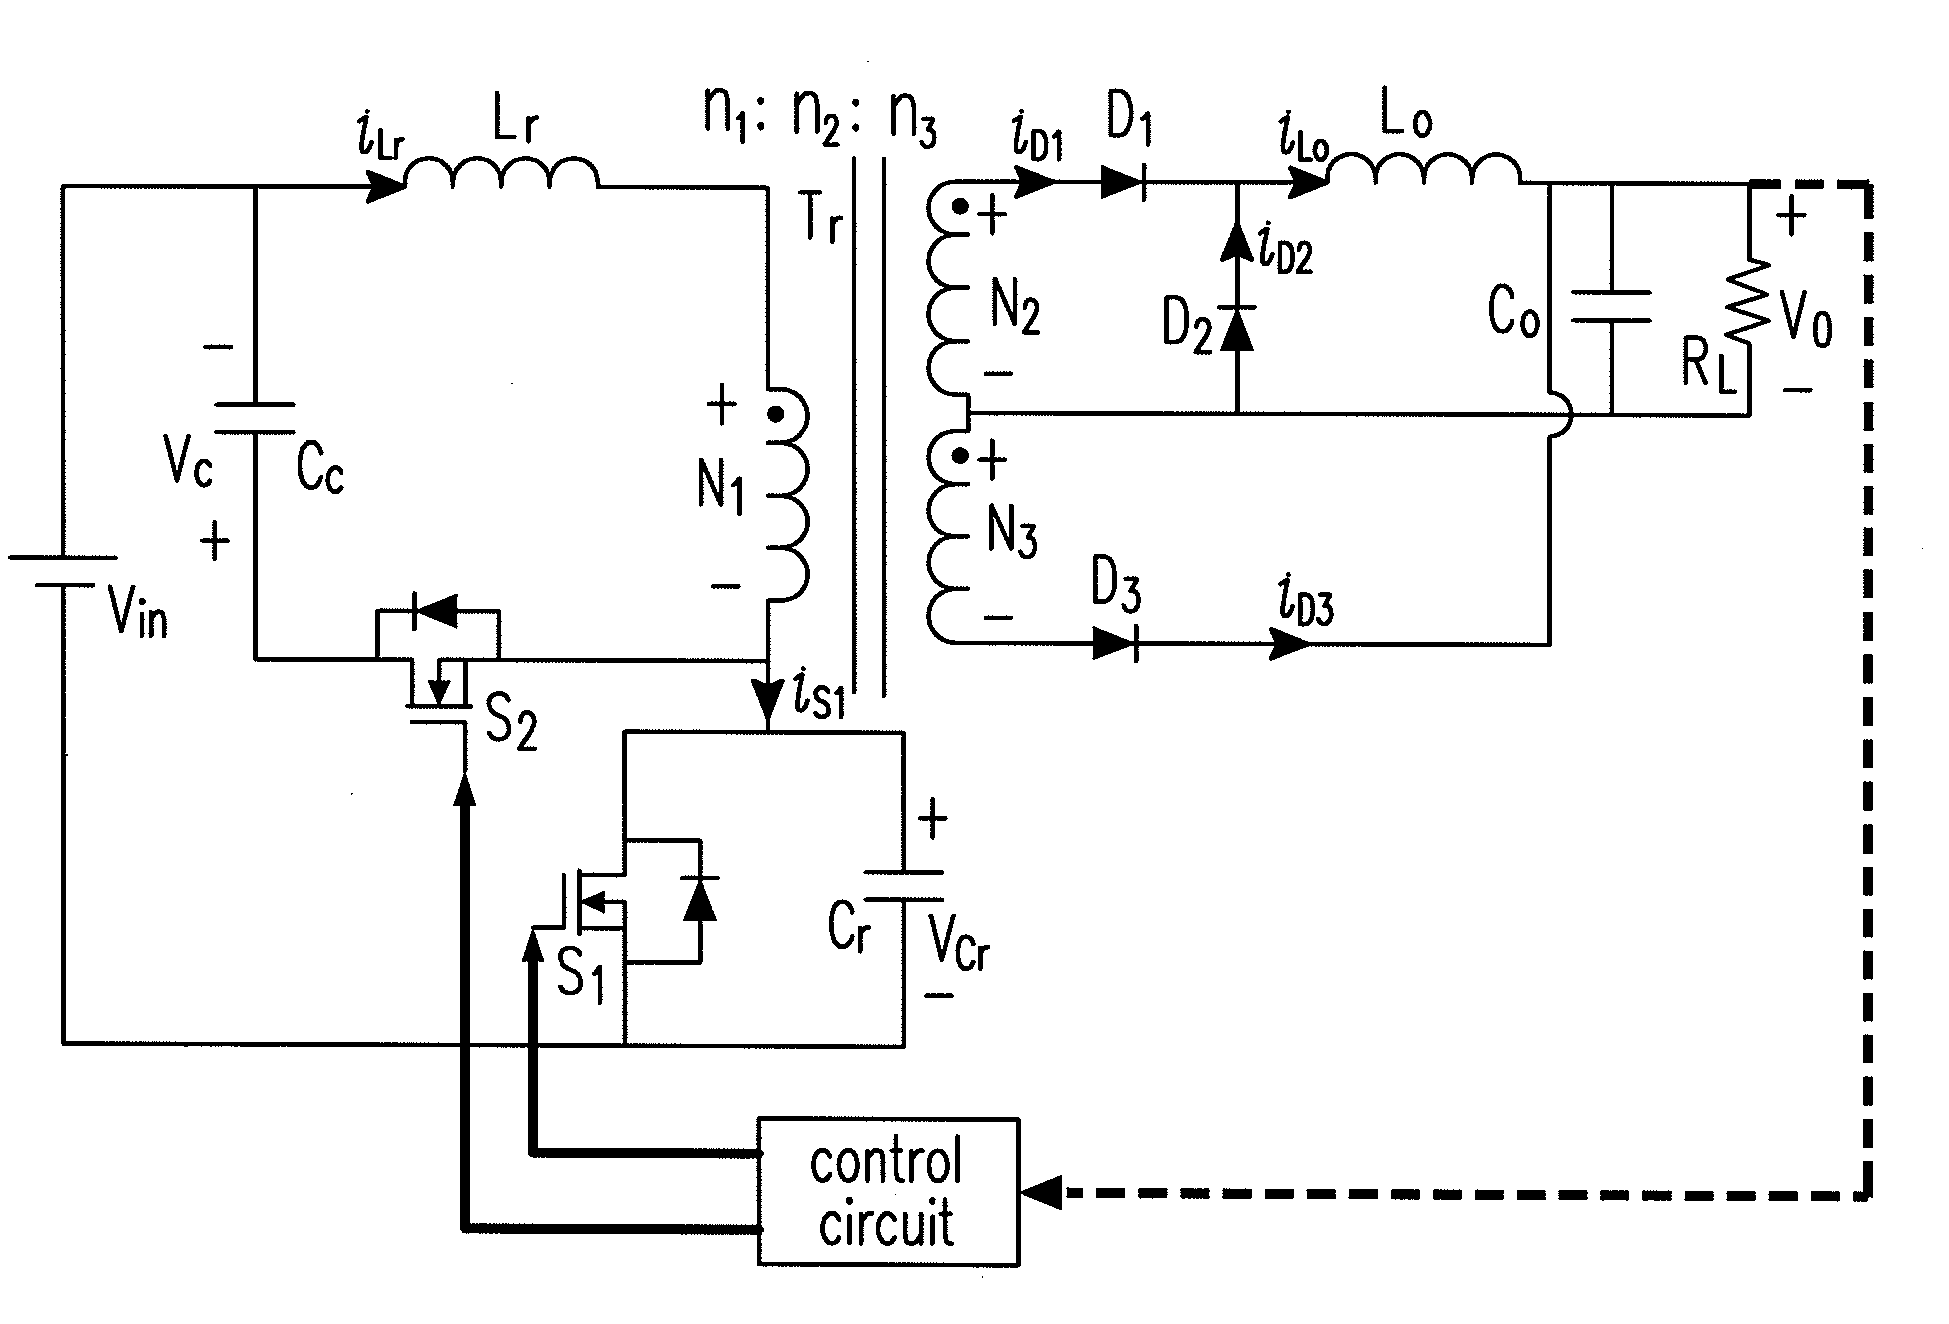 Forward-flyback converter with active-clamp circuit